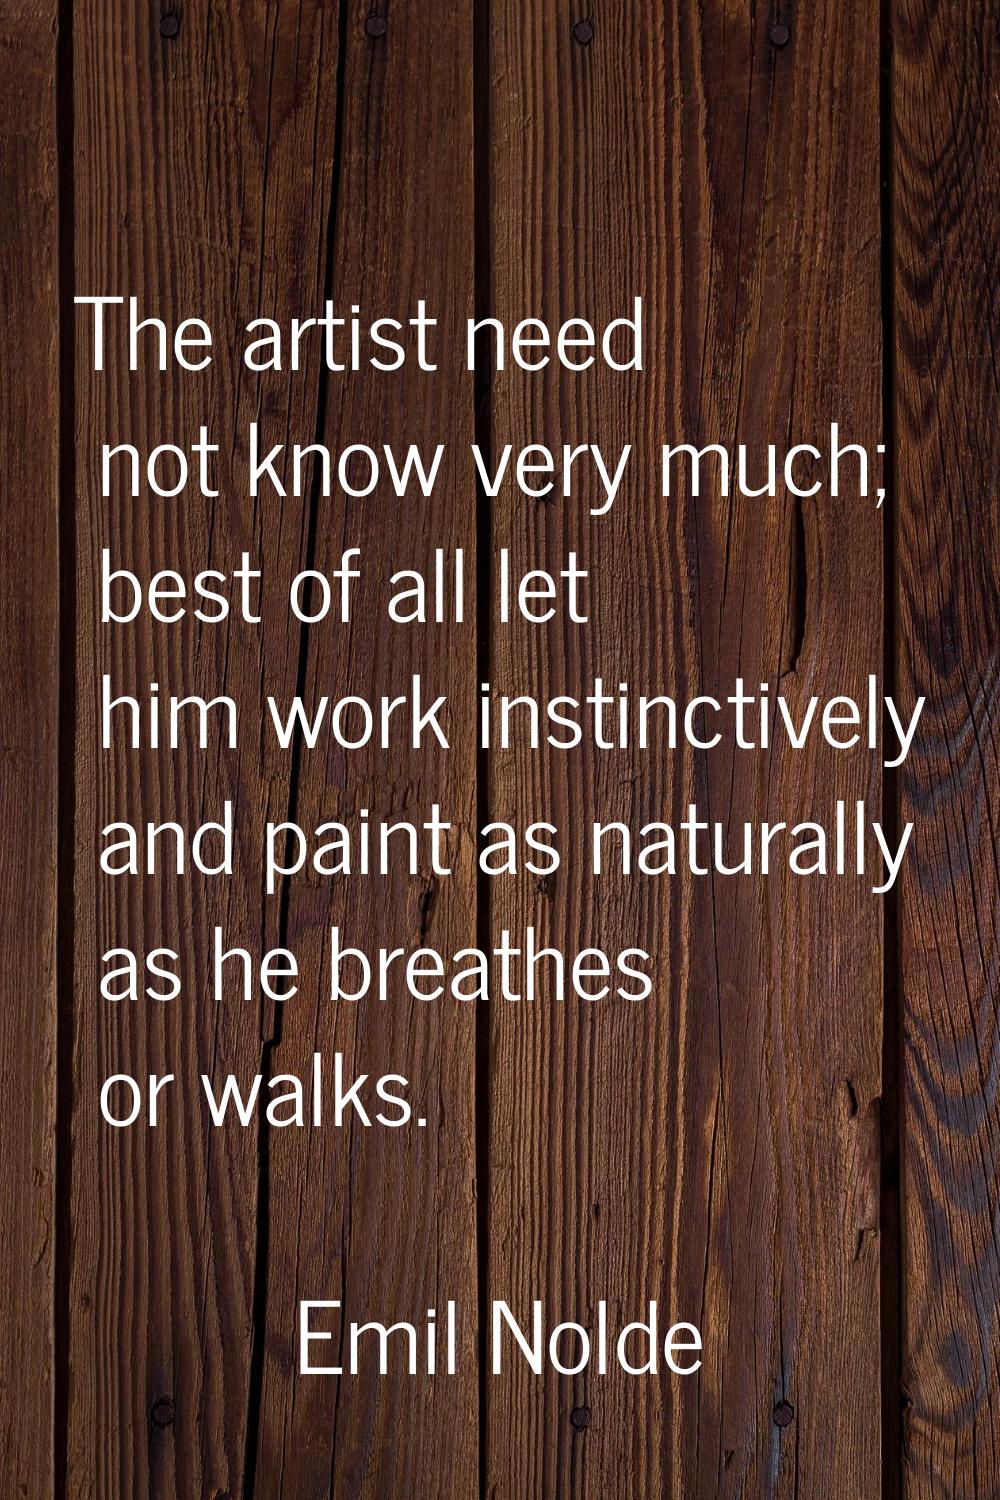 The artist need not know very much; best of all let him work instinctively and paint as naturally a